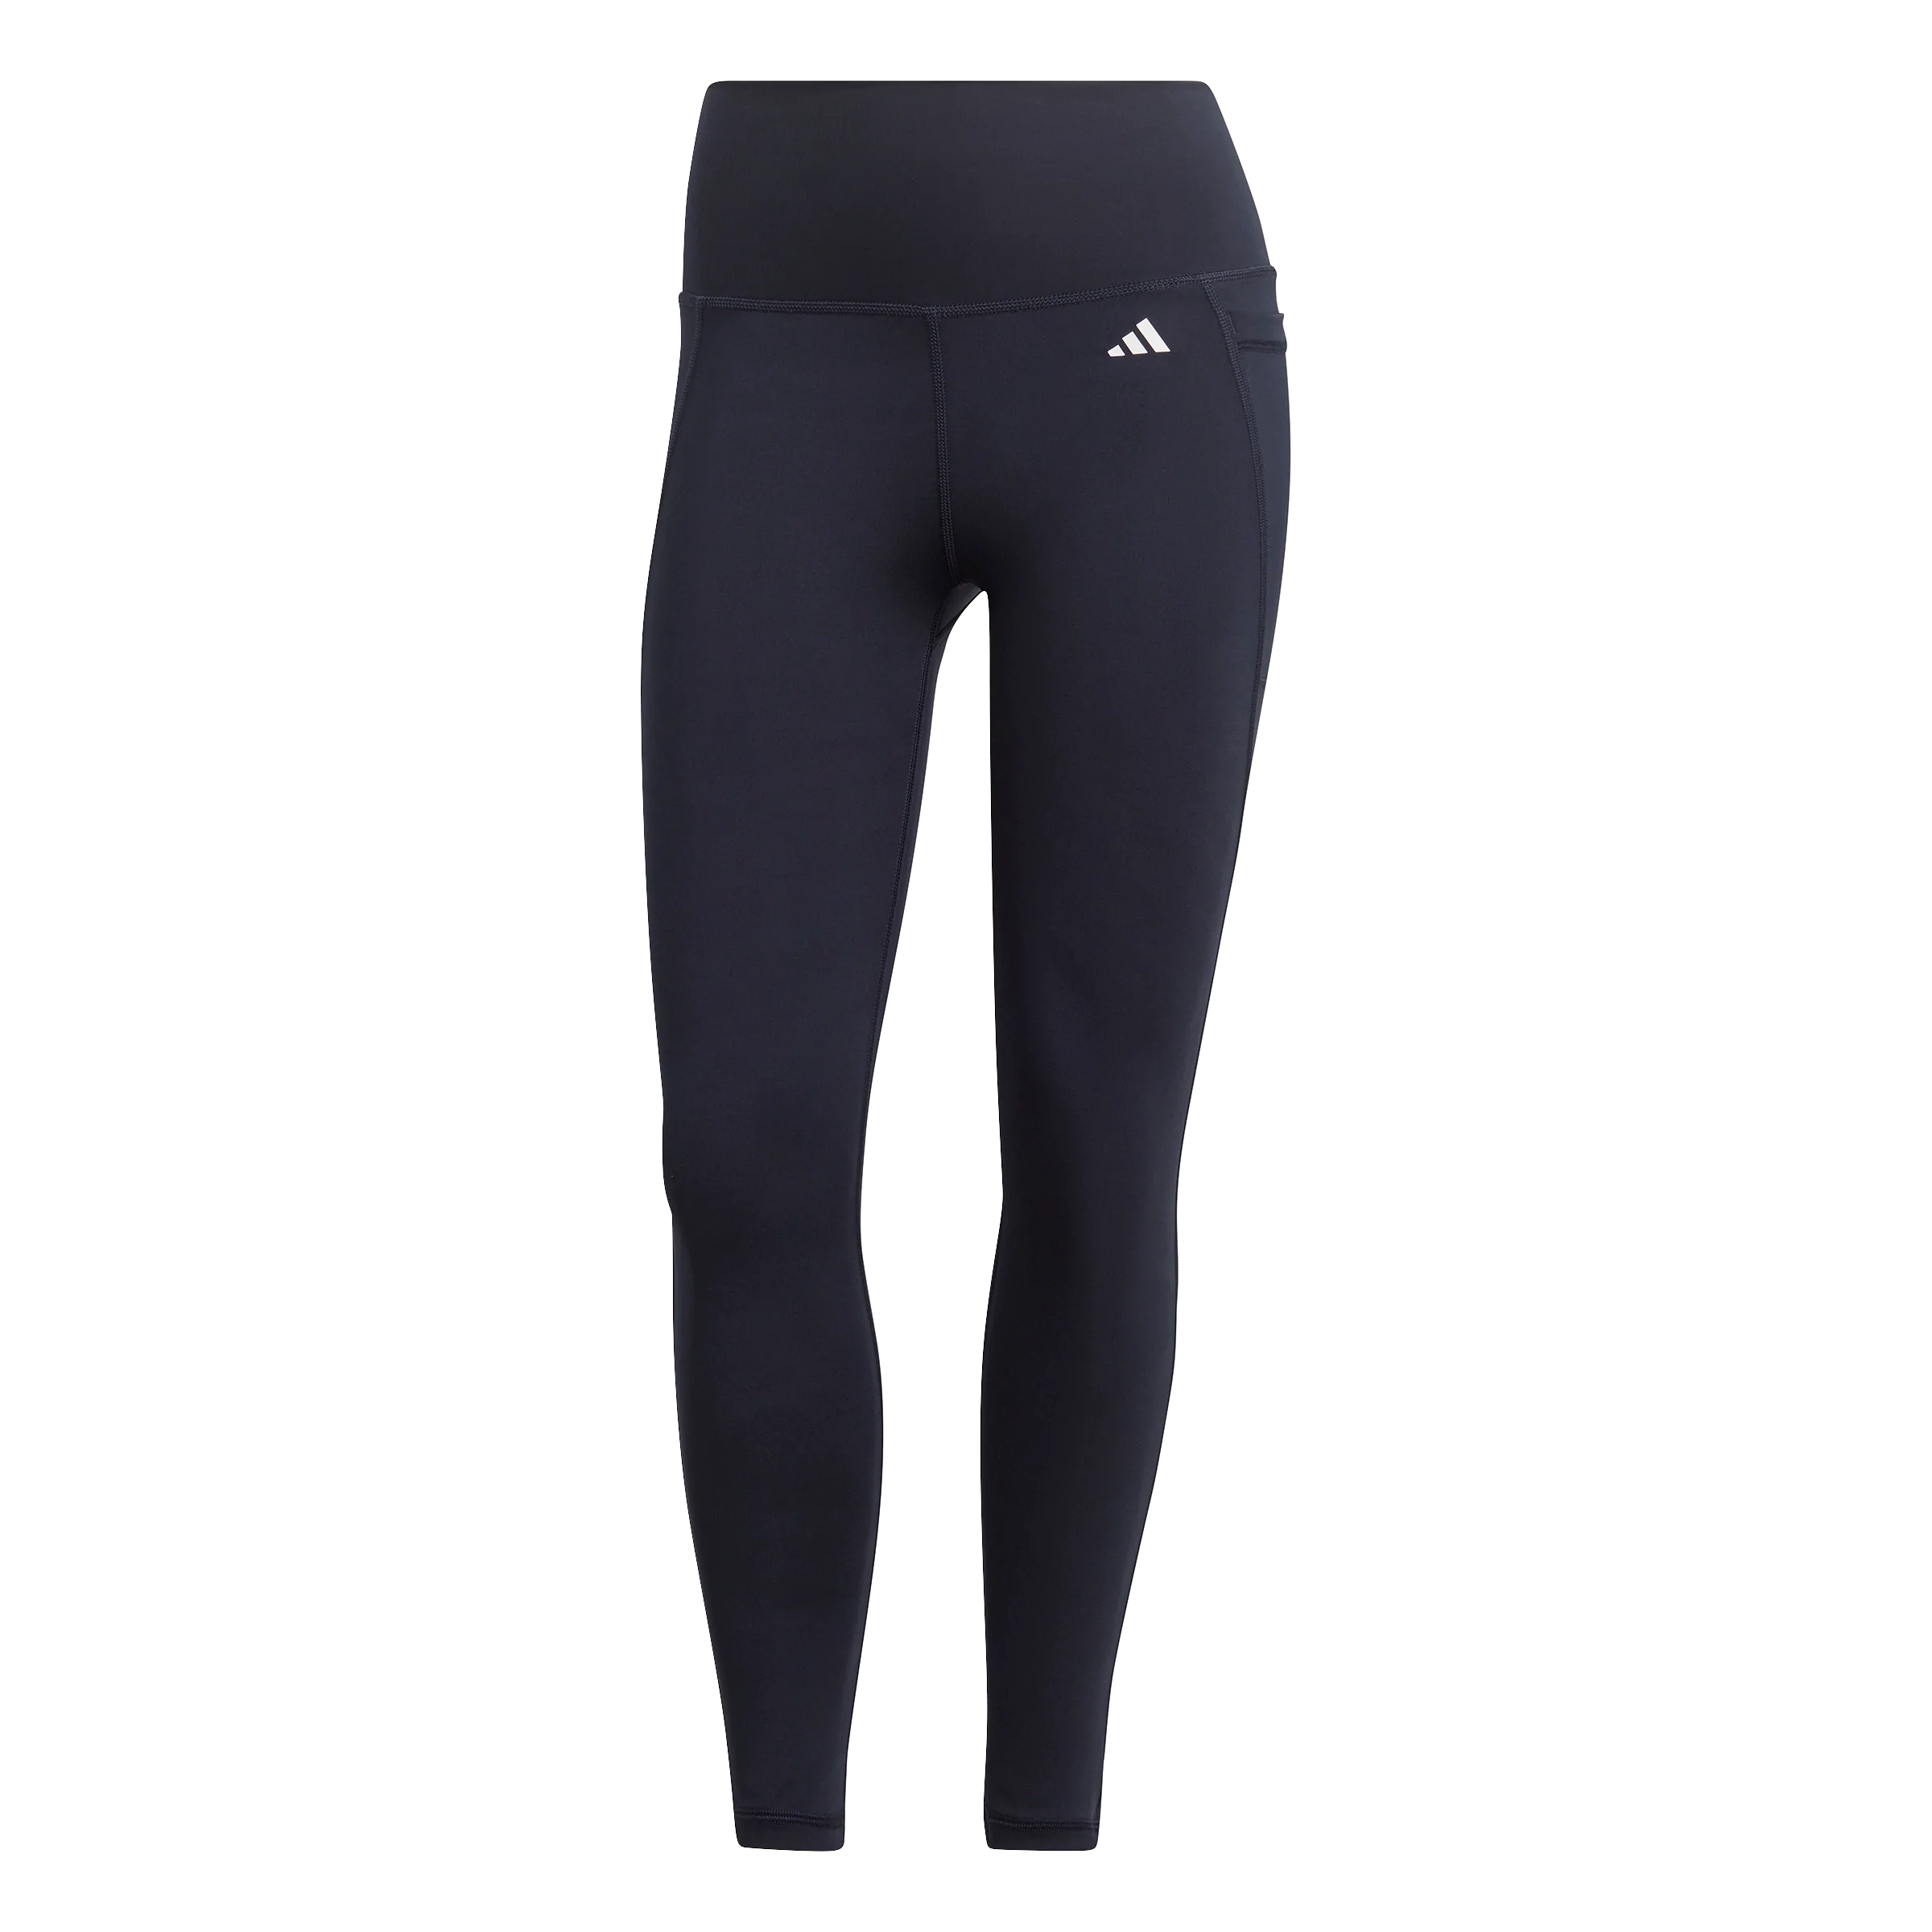 adidas Optime Stash High Waisted 7/8 Tights - Womens - Legend Ink